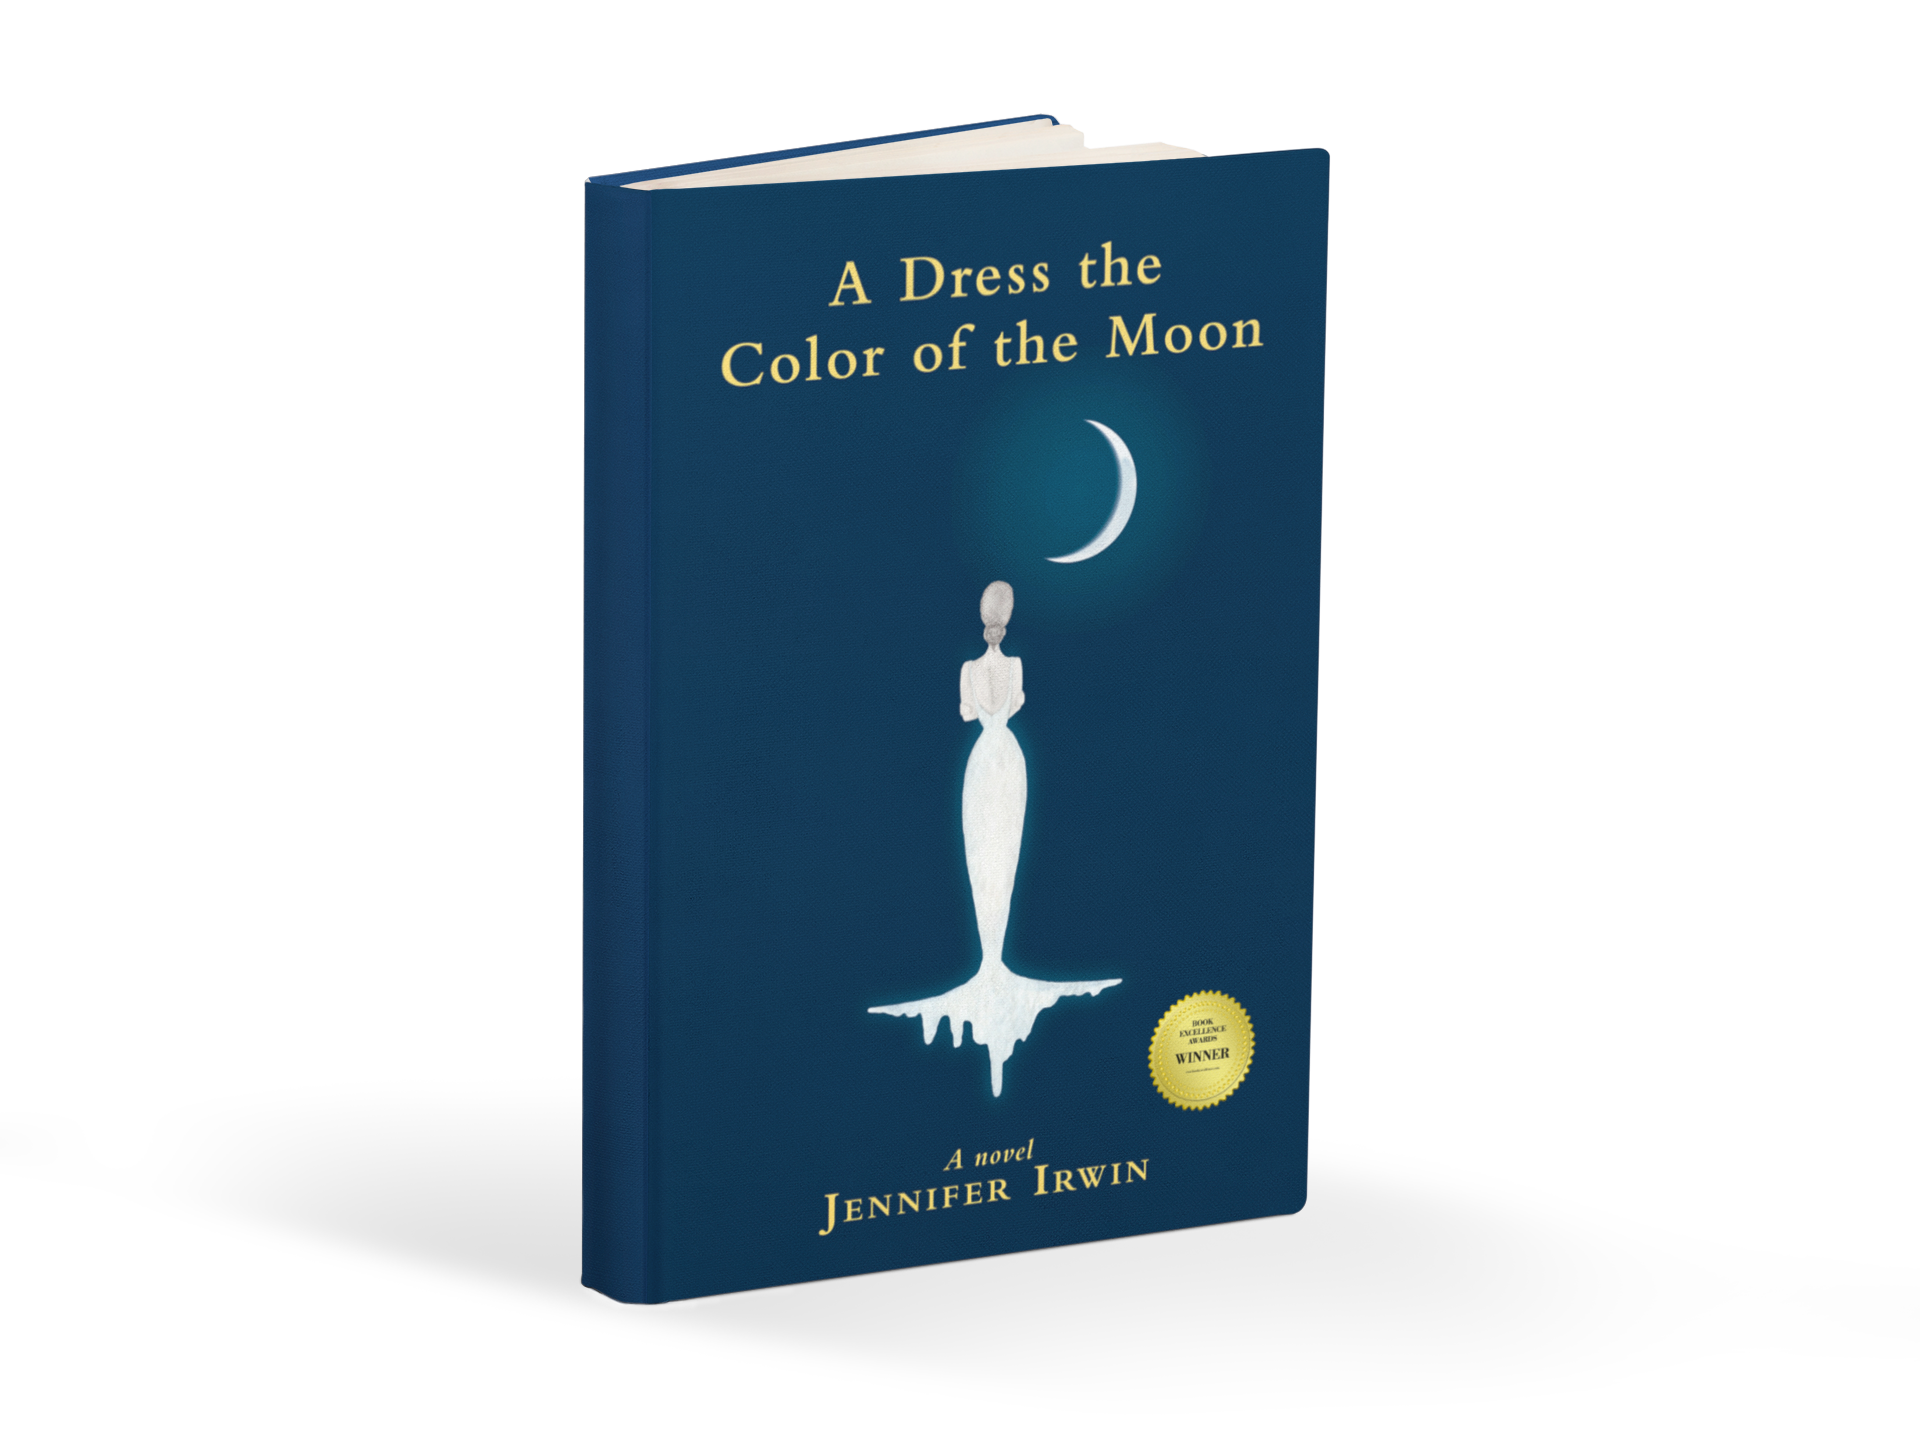 Jennifer Irwin’s, A Dress the Color of the Moon, Wins Top Prize in 2022 Book Excellence Awards